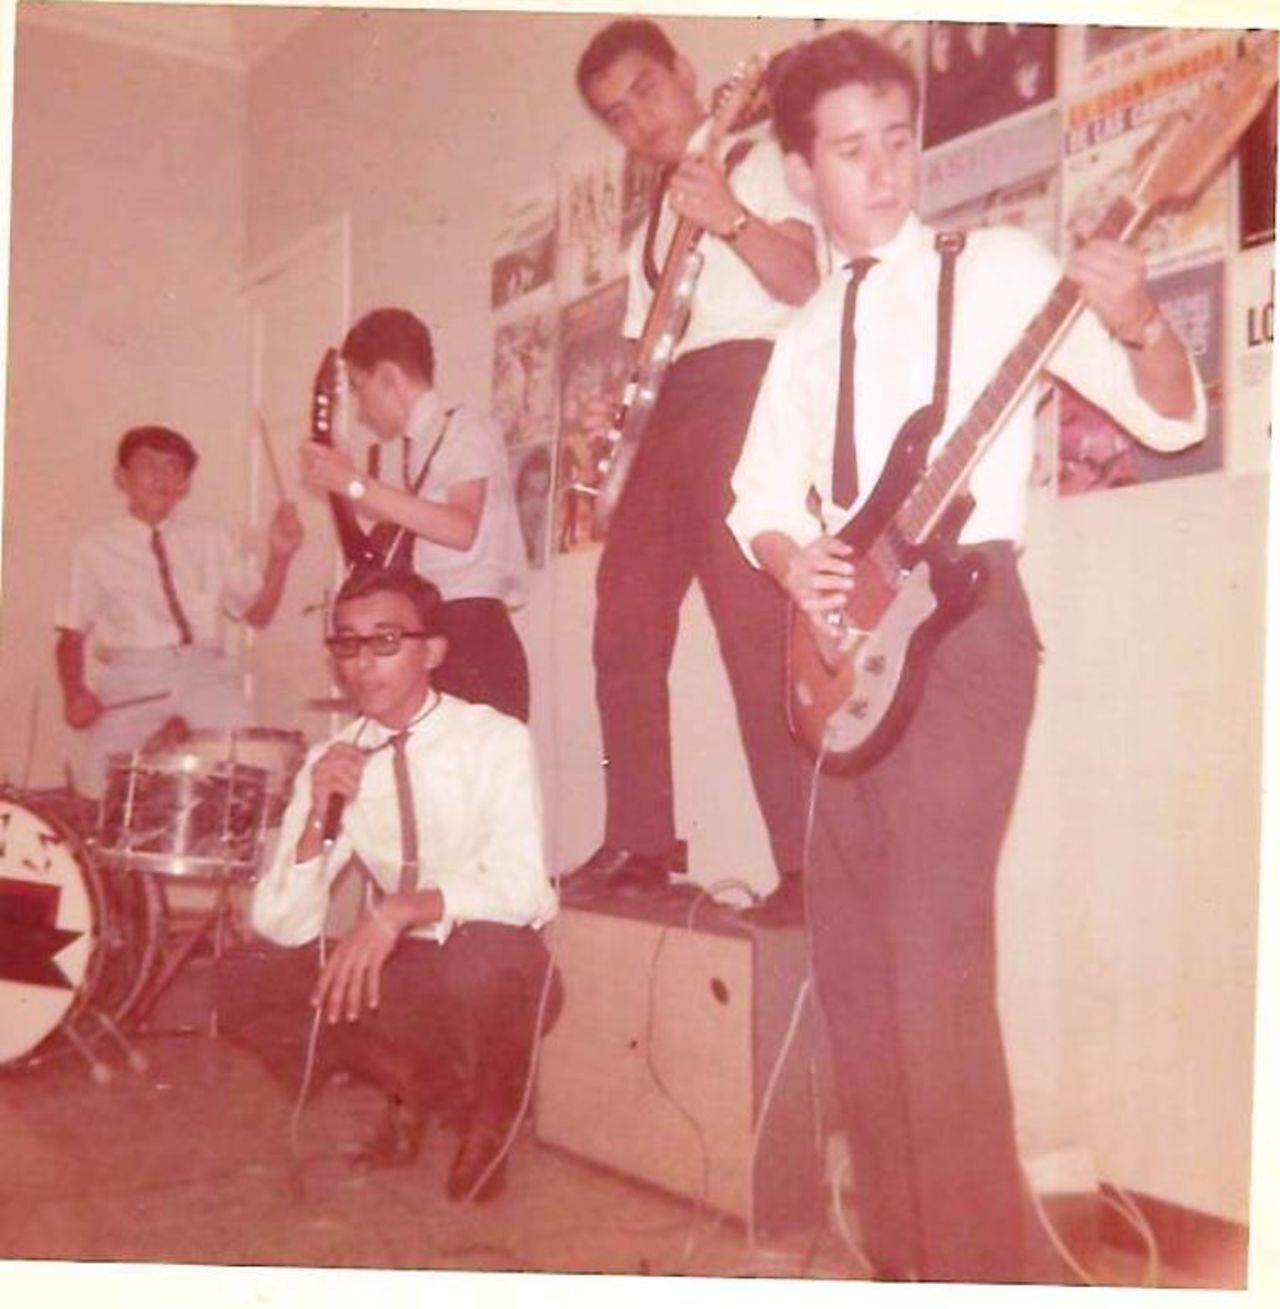 The influence of Beatlemania also reached Venezuela in the 1960s, where <a href="http://ireport.cnn.com/docs/DOC-1077325">Marines Lares</a> says teenage boys formed bands to emulate the "Fab Four." "Many boys started to play electric guitars and they formed rock groups singing in English and in Spanish, sometimes translating the lyrics from English to Spanish, and other times composing their own lyrics in their native language."